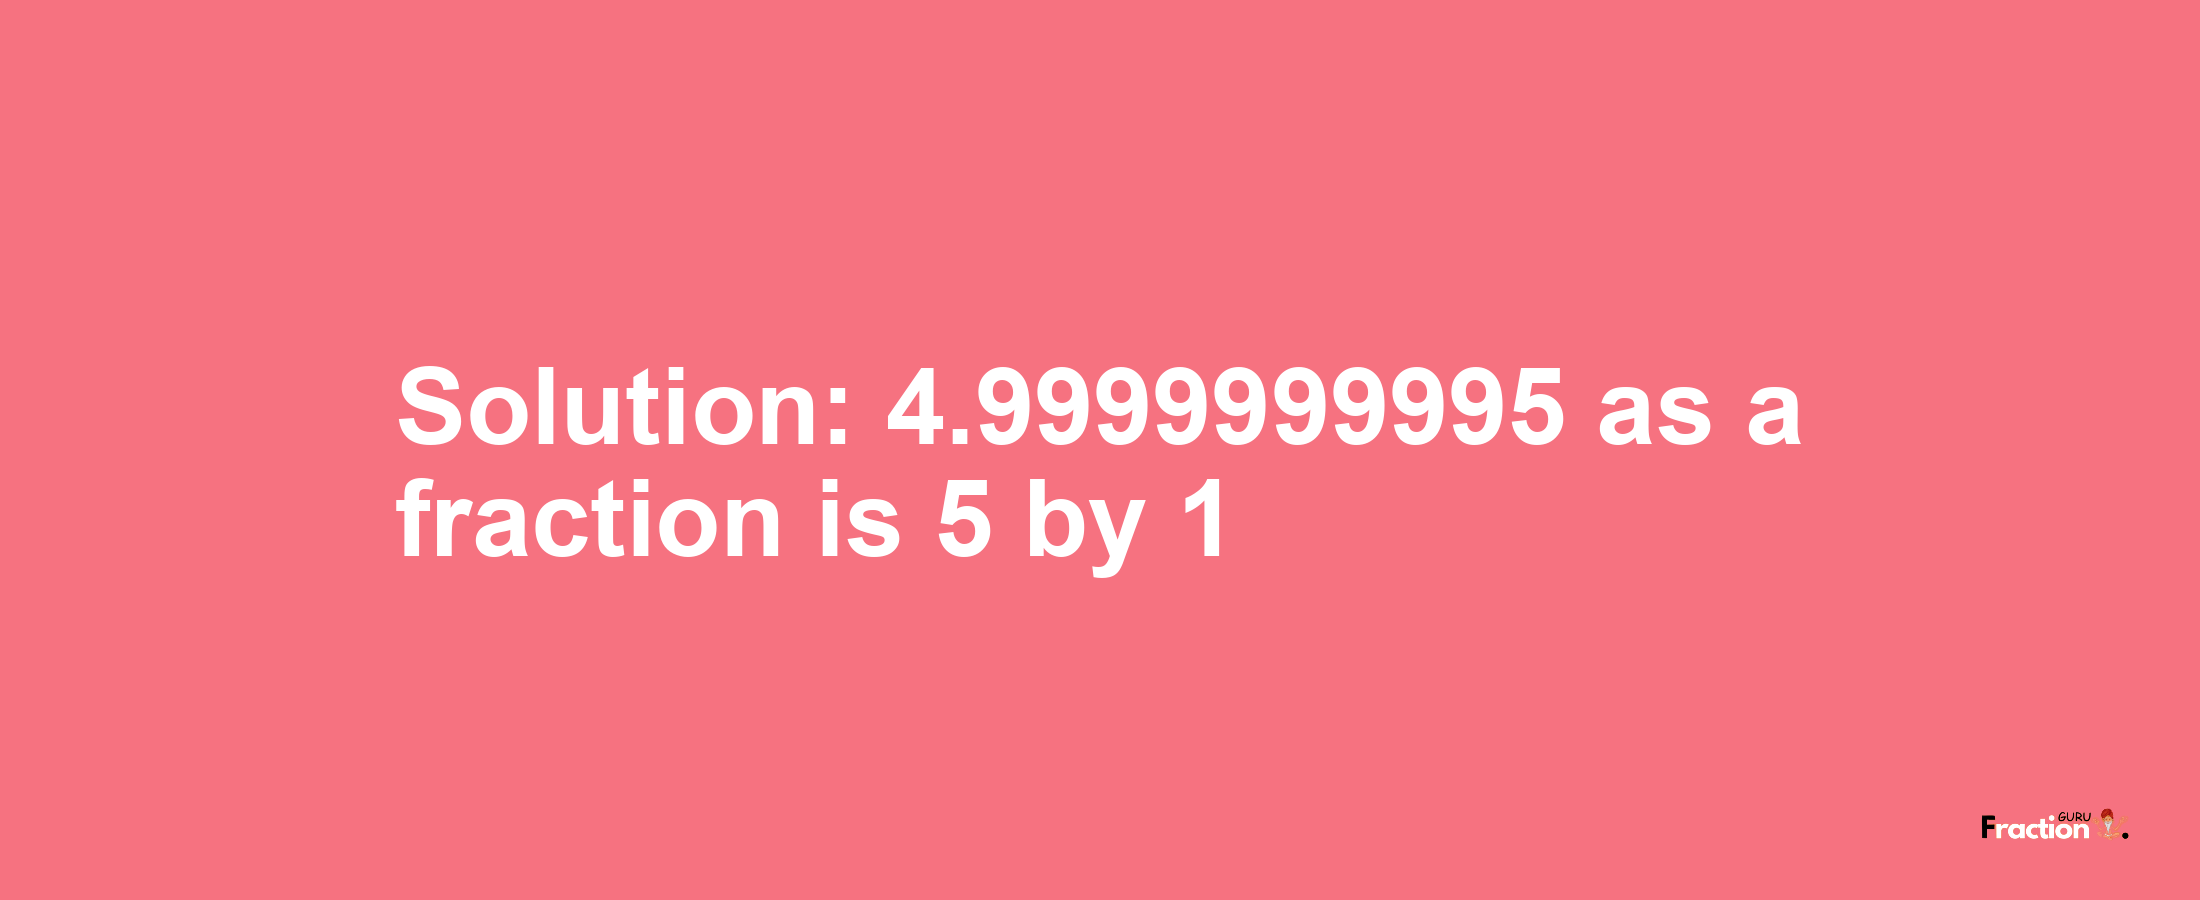 Solution:4.9999999995 as a fraction is 5/1